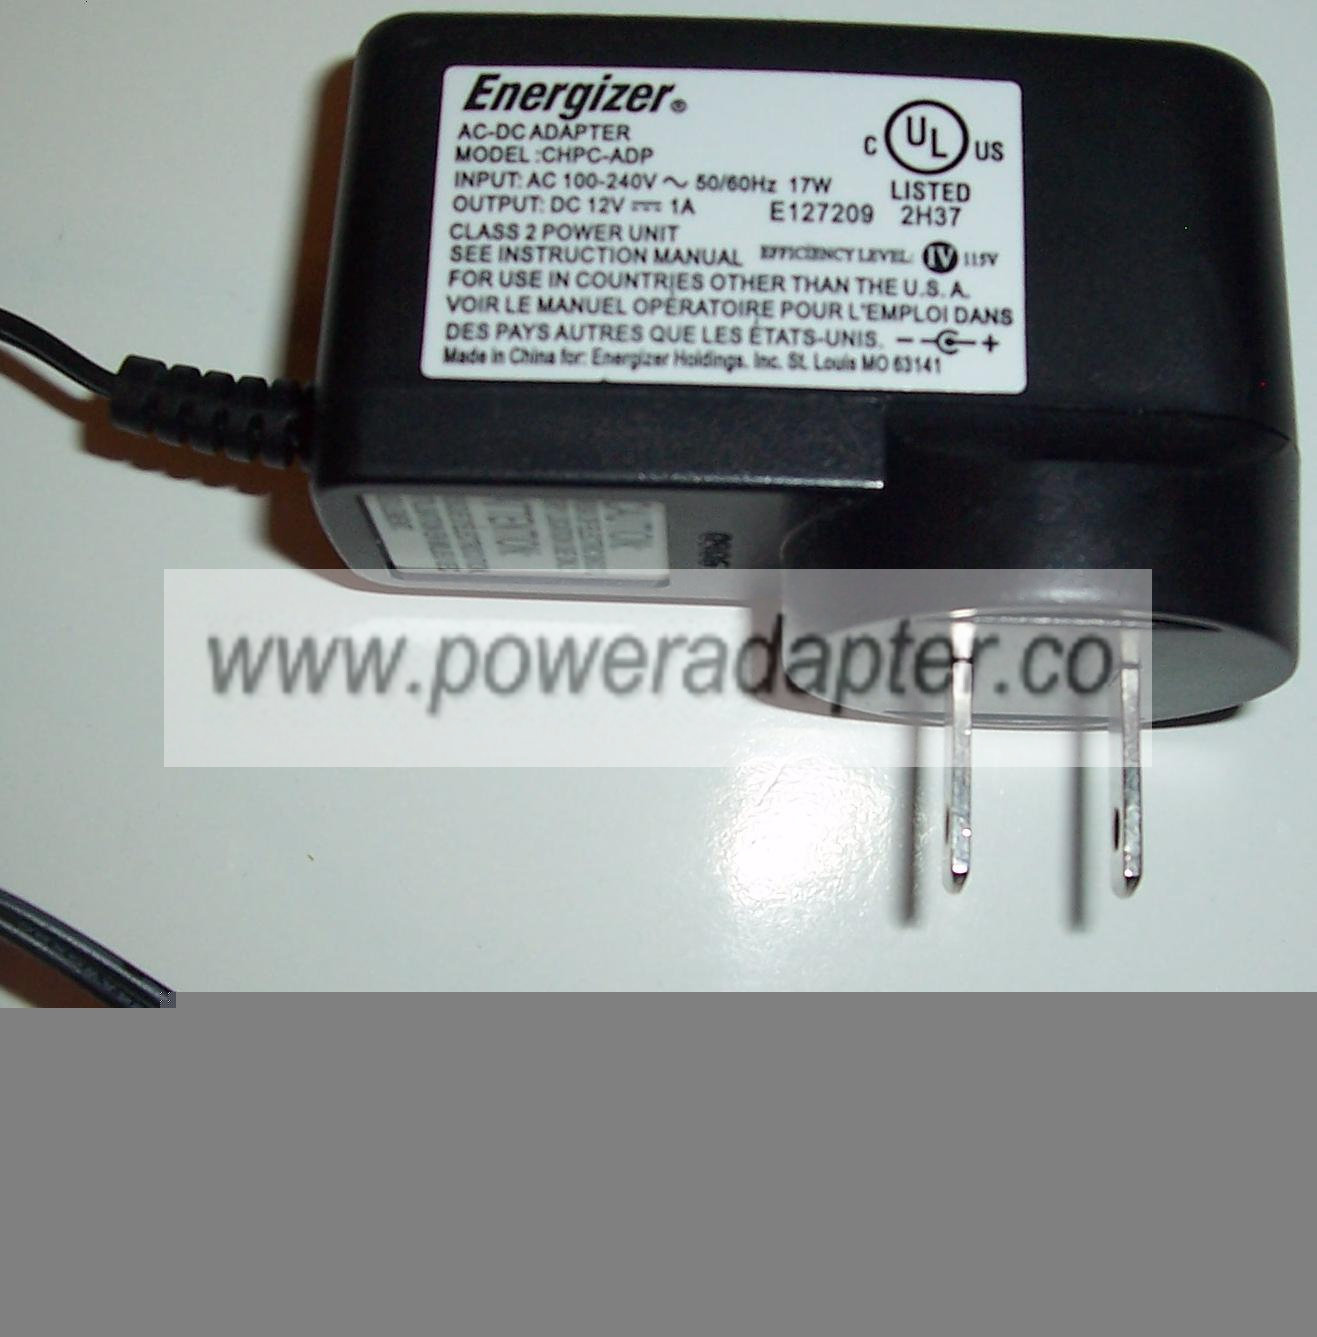 ENERGIZER CHPC-ADP AC DC ADAPTER 12V 1A CLASS 2 POWER SUPPLY